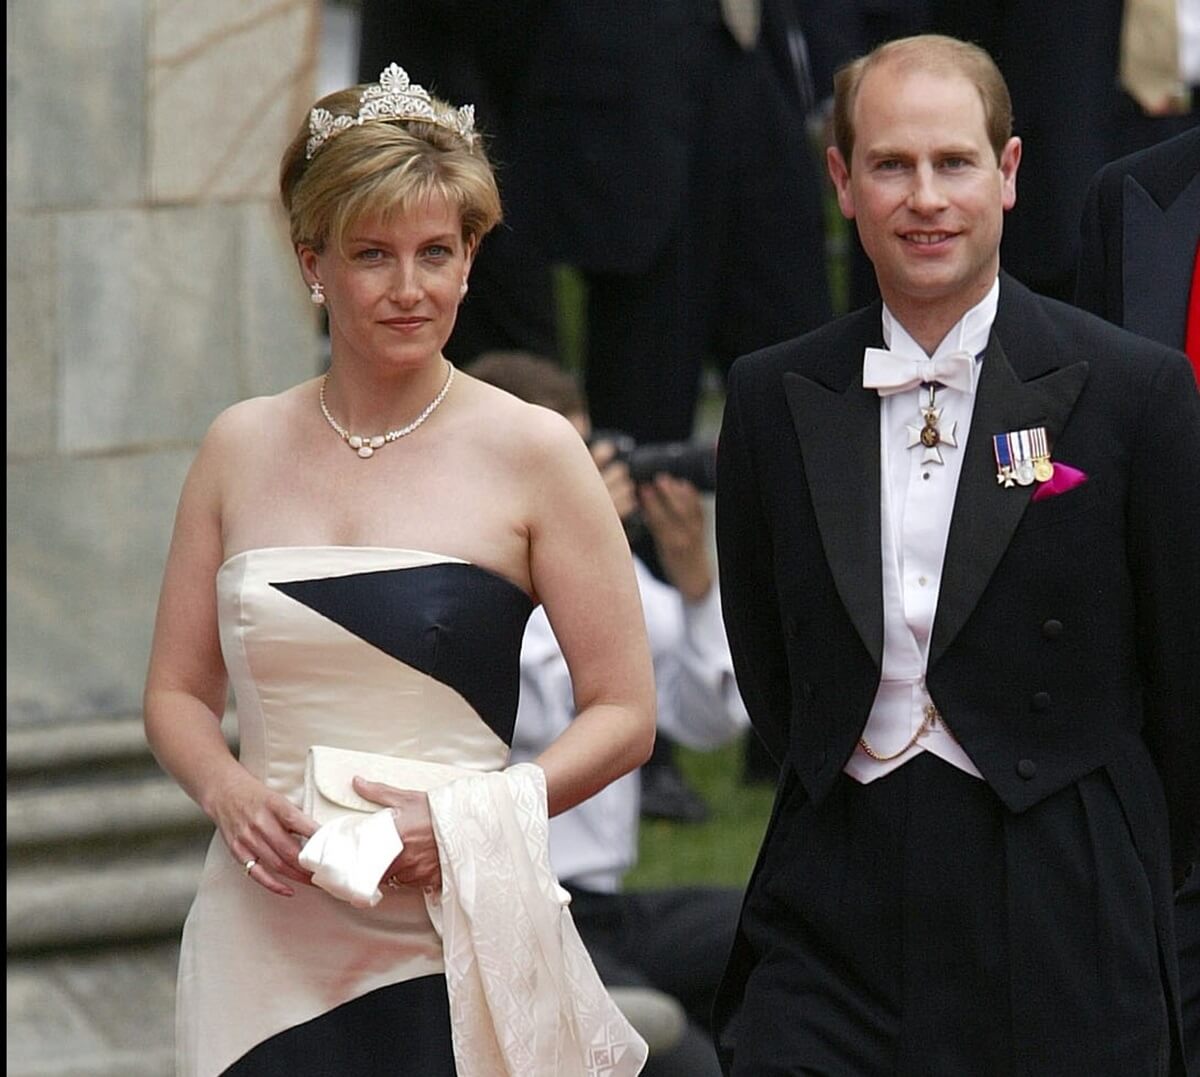 Prince Edward and Sophie (now-Duchess of Edinburgh) arrive at the wedding of Princess Martha Louise and Ari Behn in Trondheim, Norway